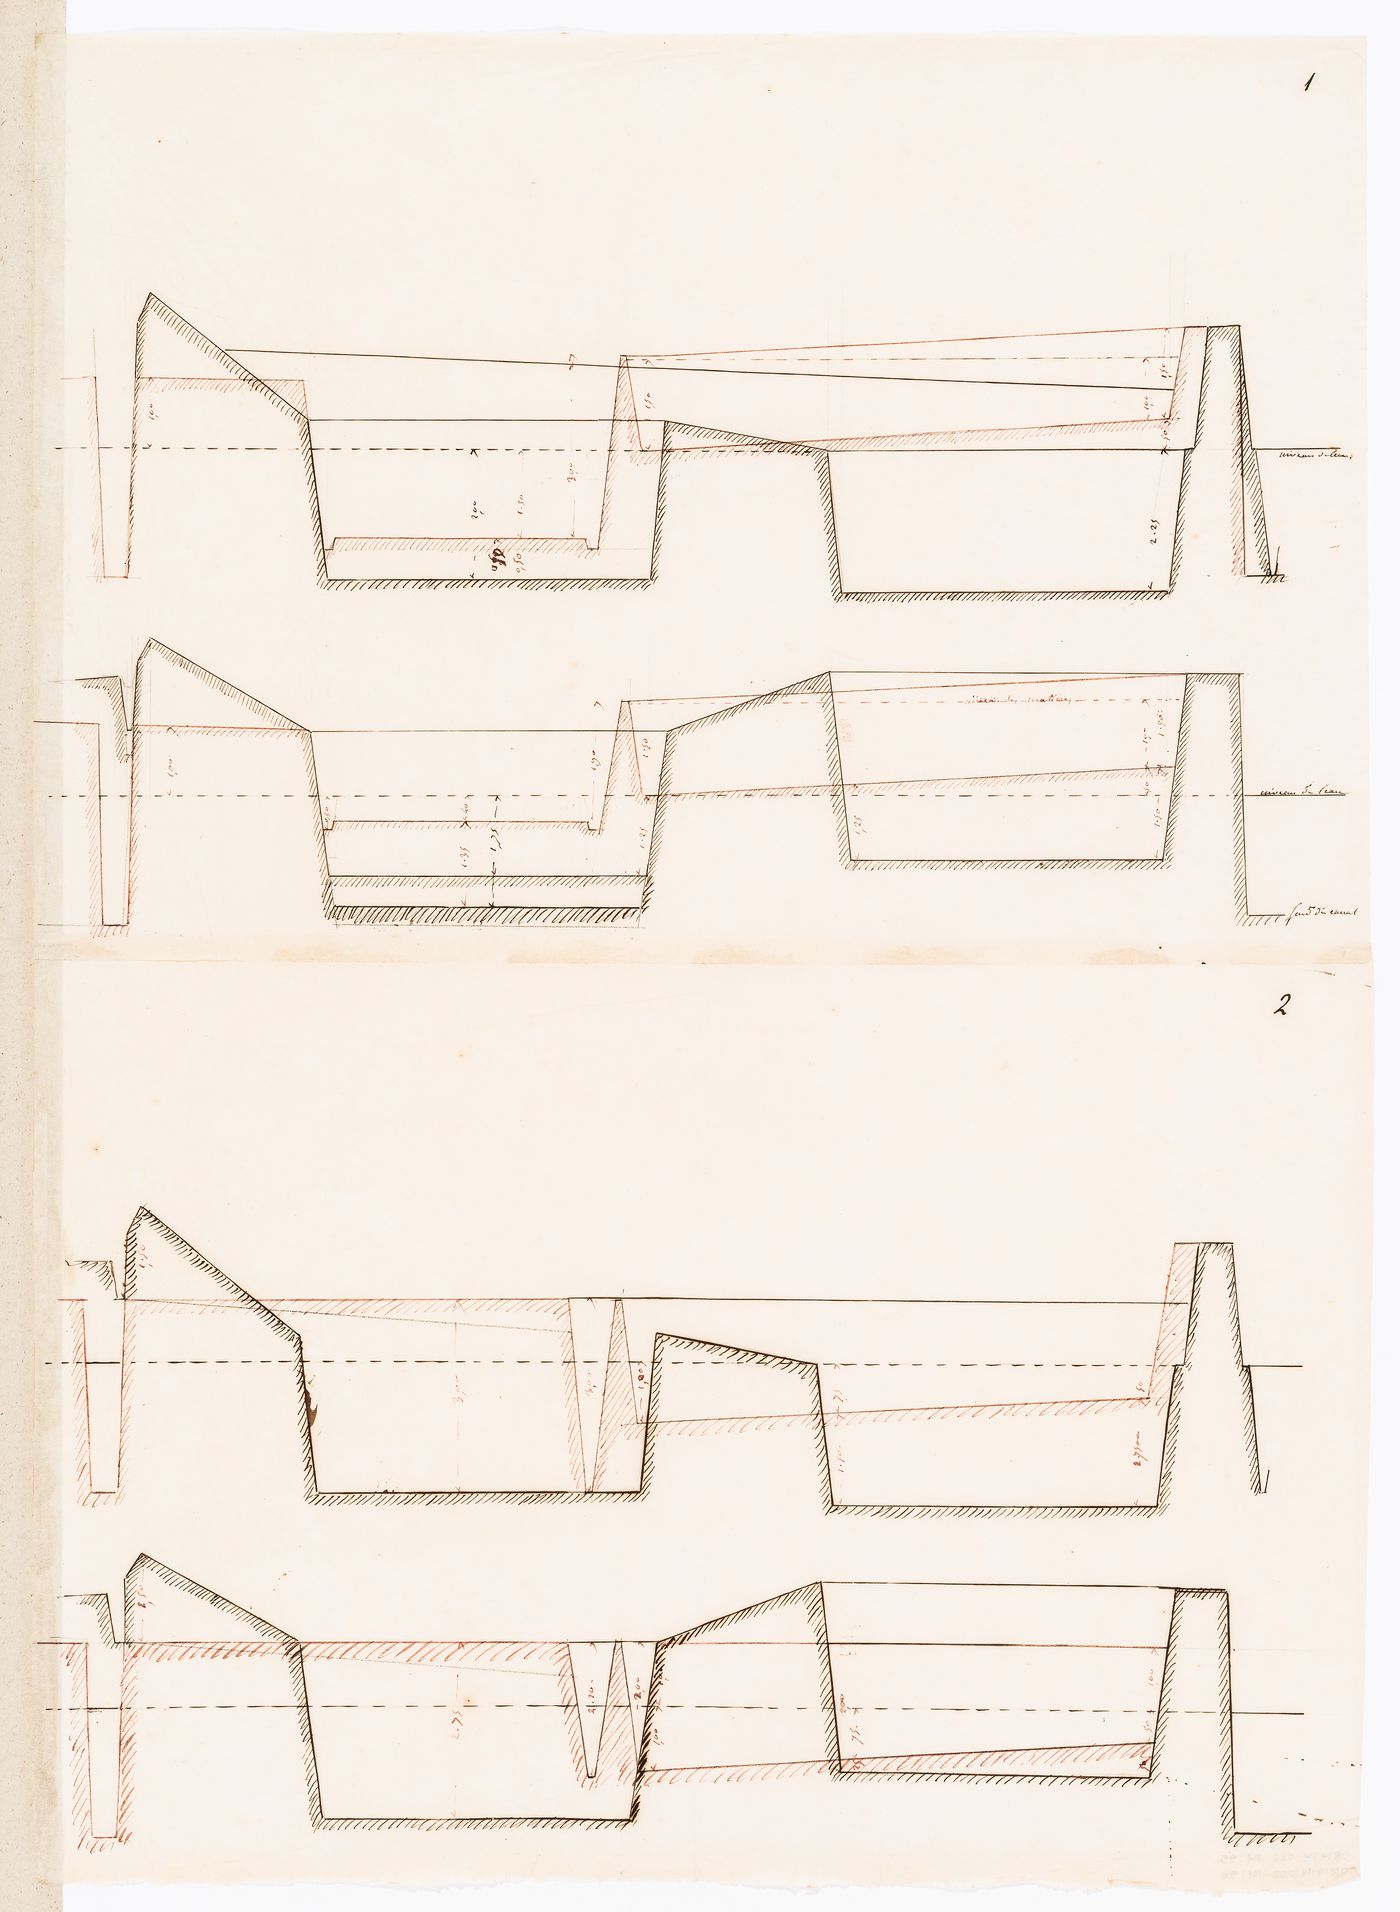 Sections showing proposed water levels, possibly in basins for either Clos d'équarrissage or the horse slaughterhouse, La Villette